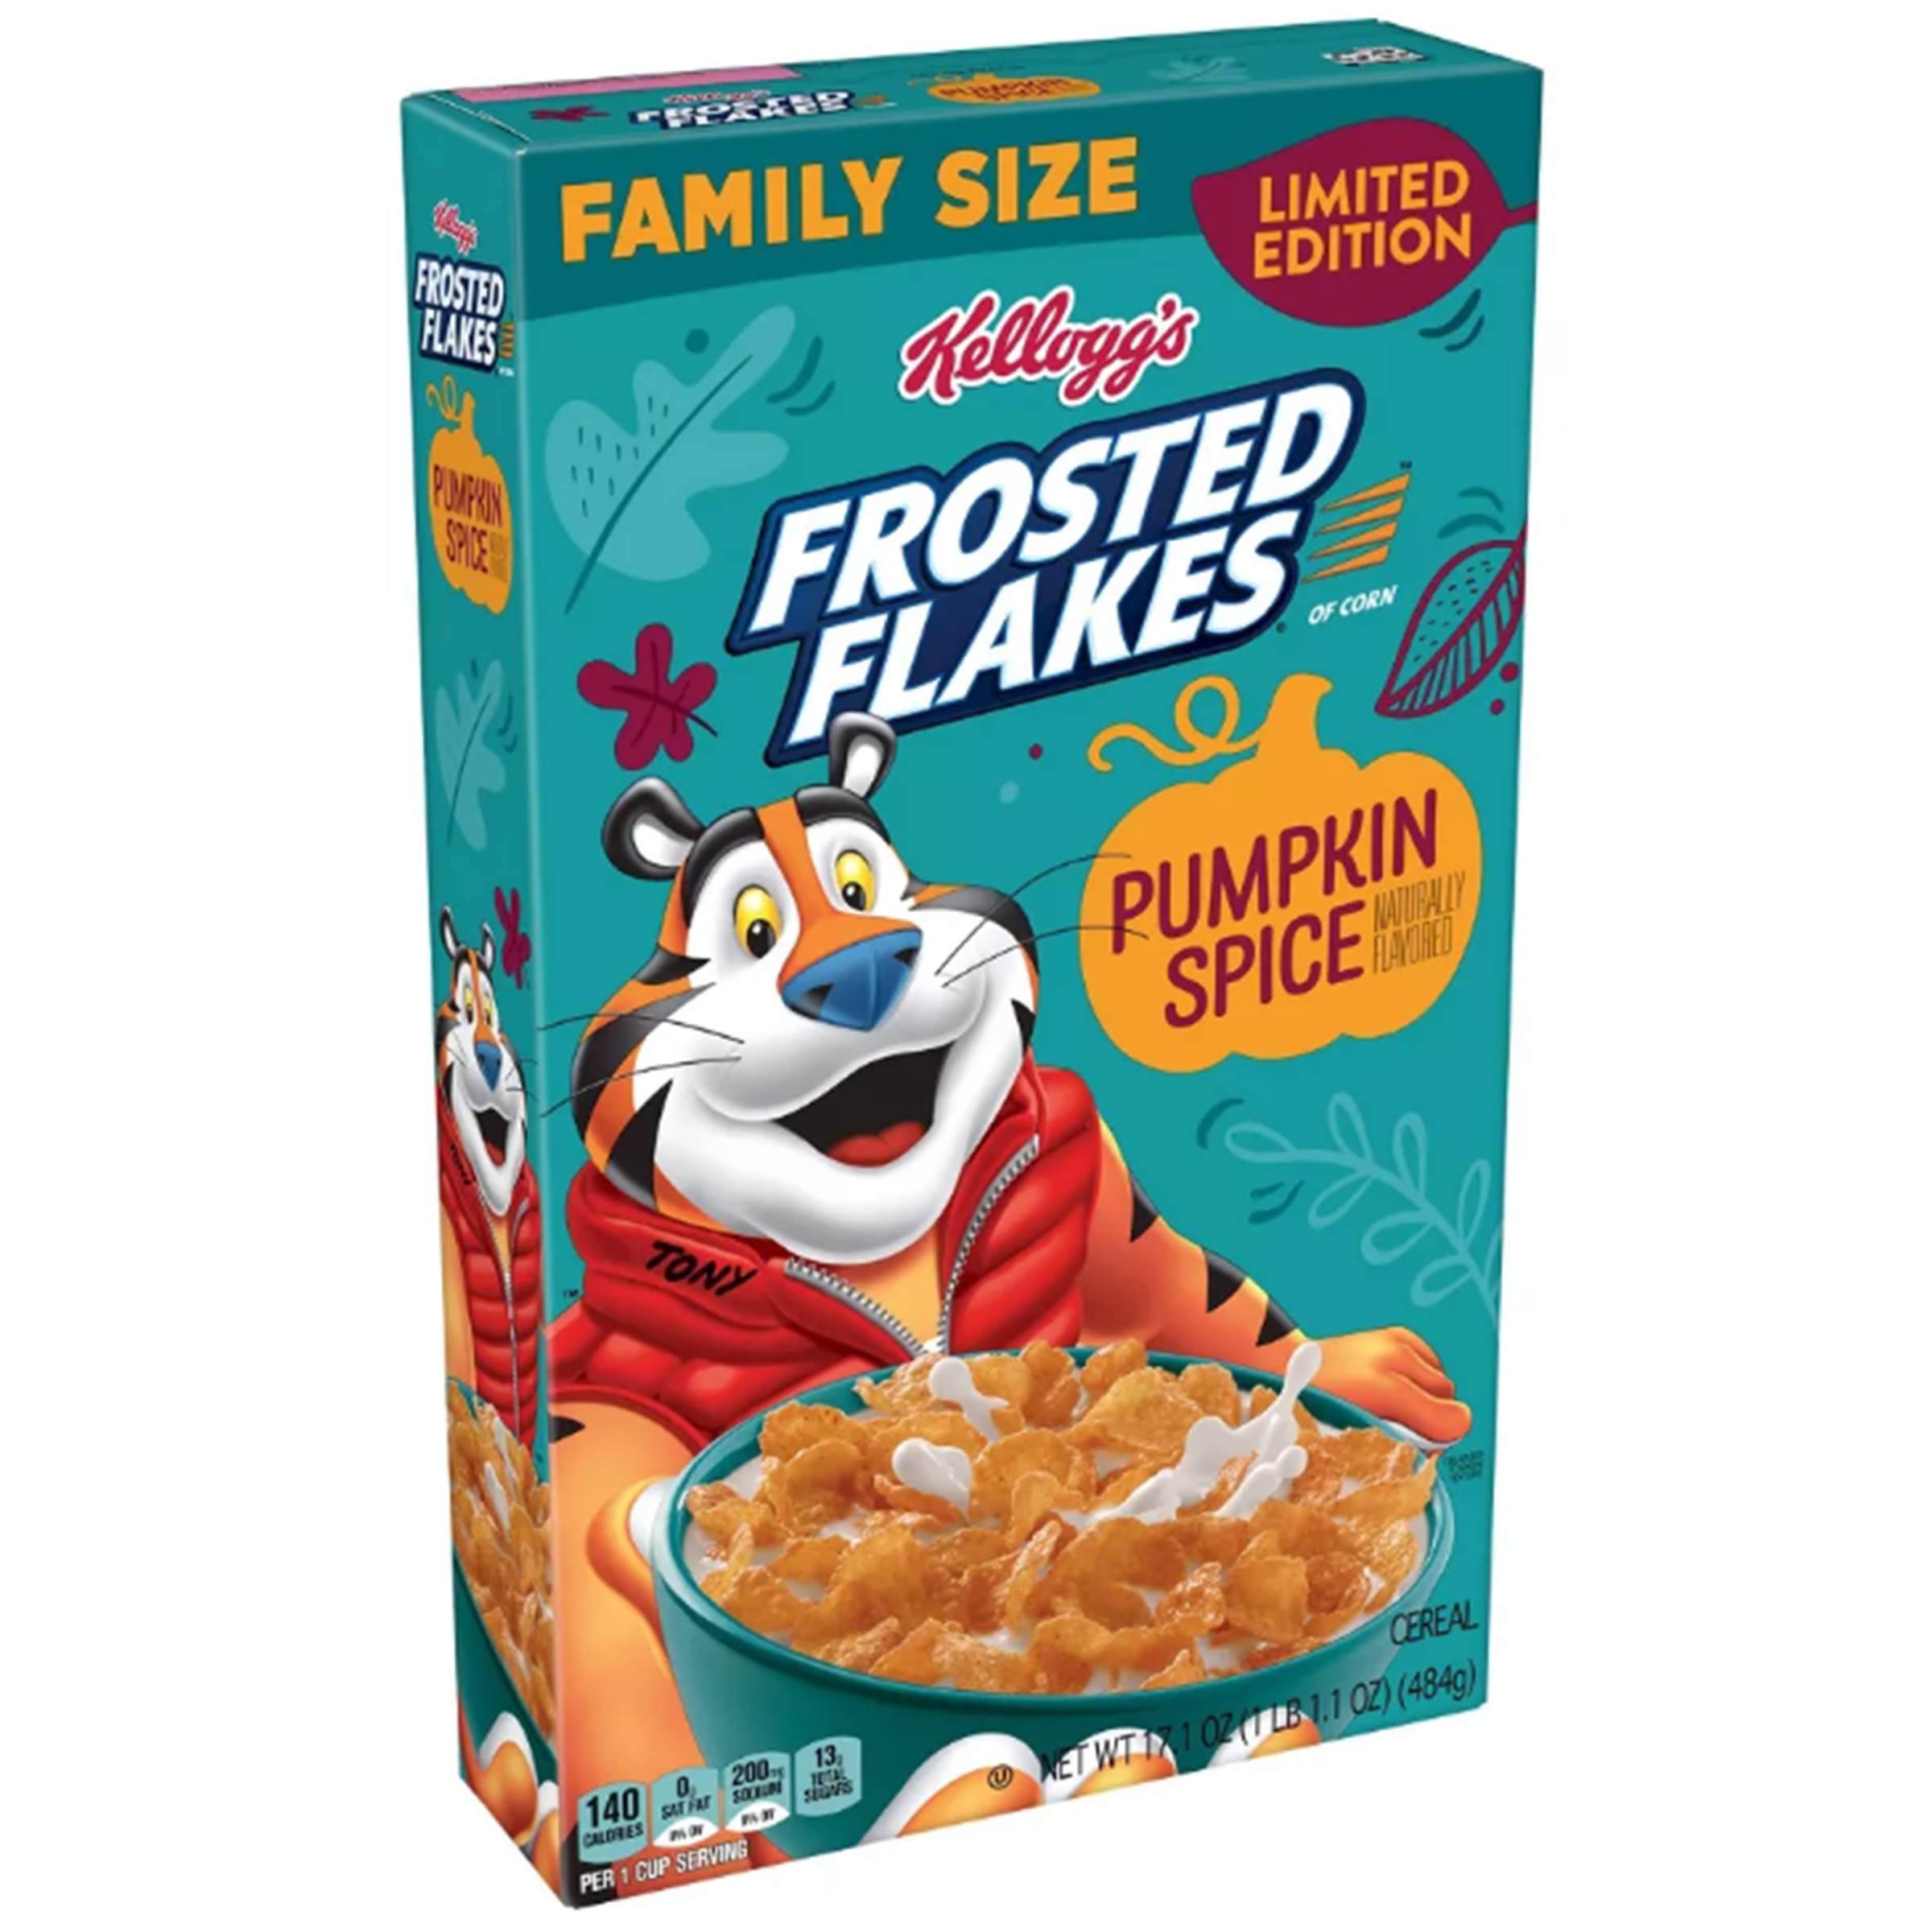 Frosted Flakes Pumpkin Spice - Family Size